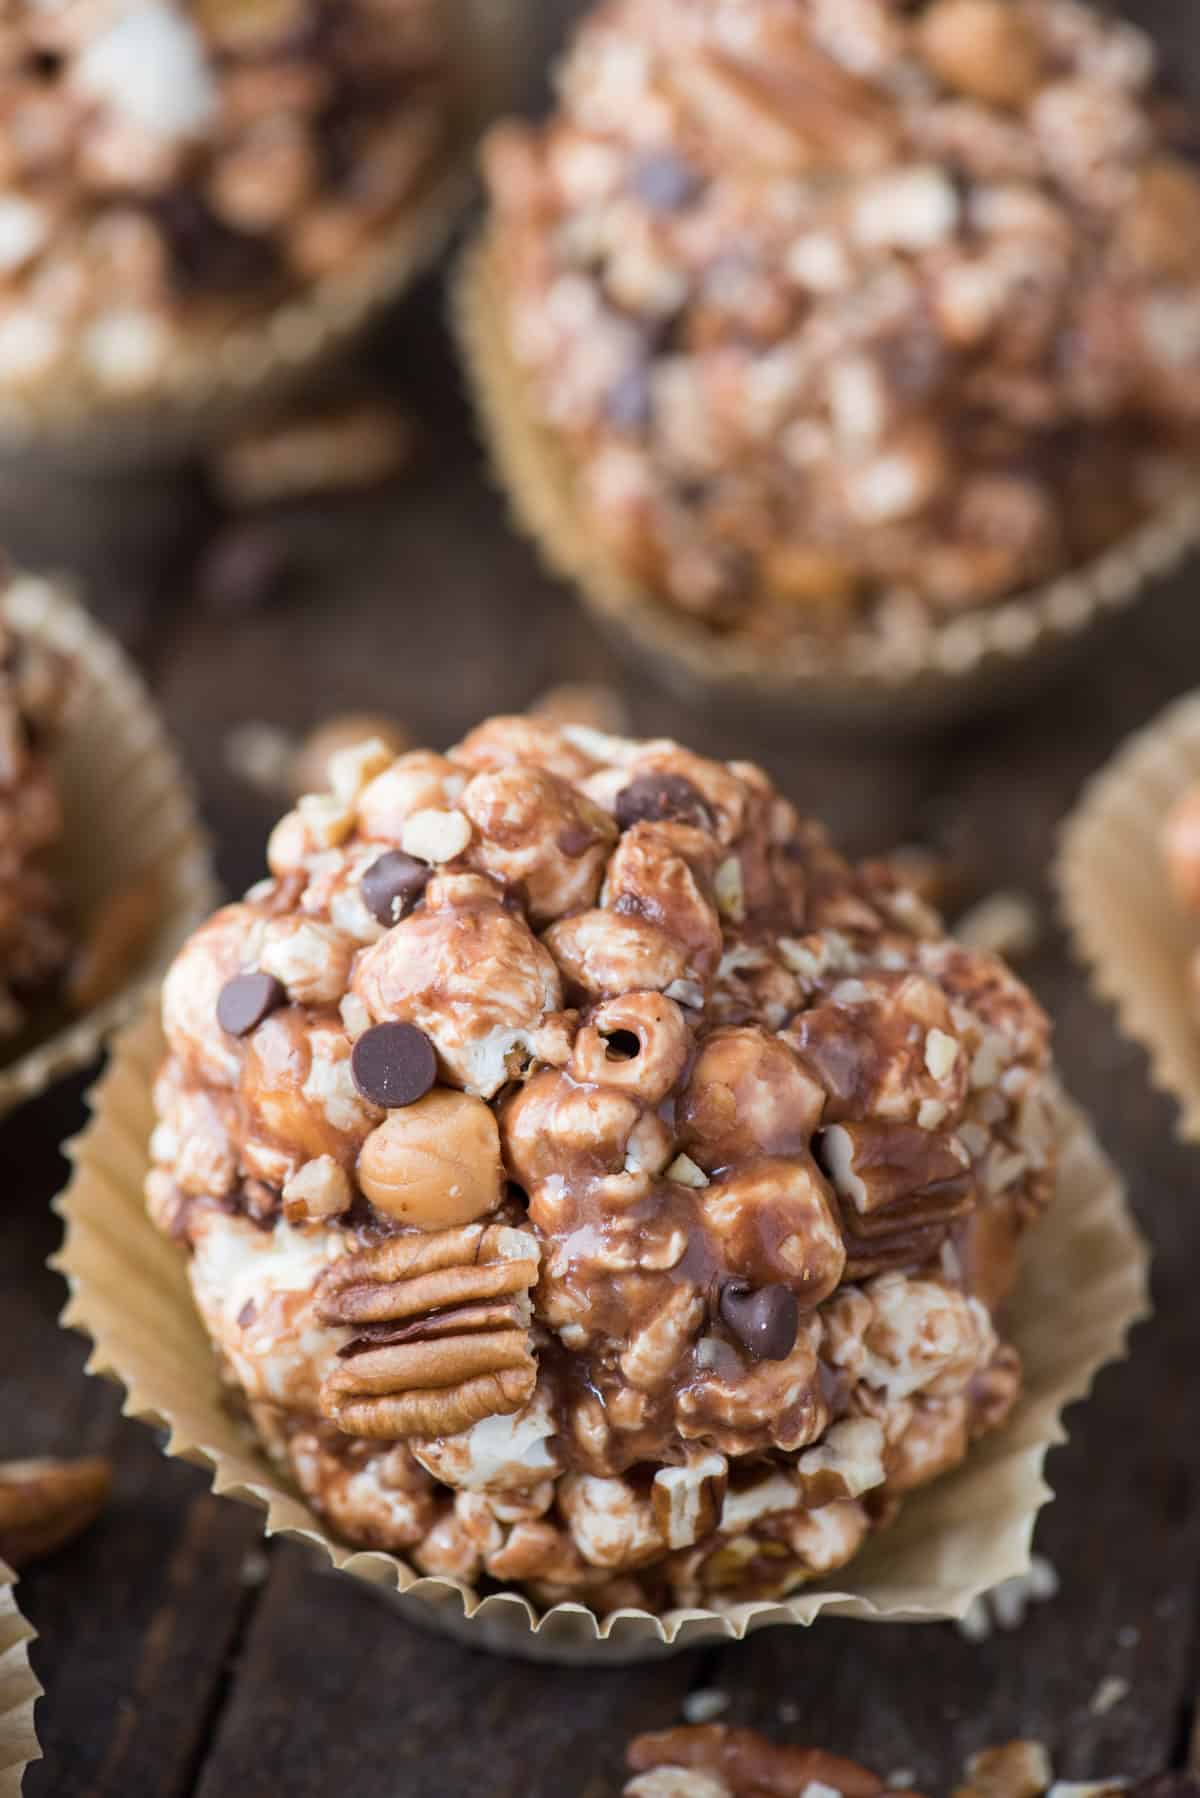 turtle popcorn balls with caramel, chocolate and pecans in paper liner on dark wood background